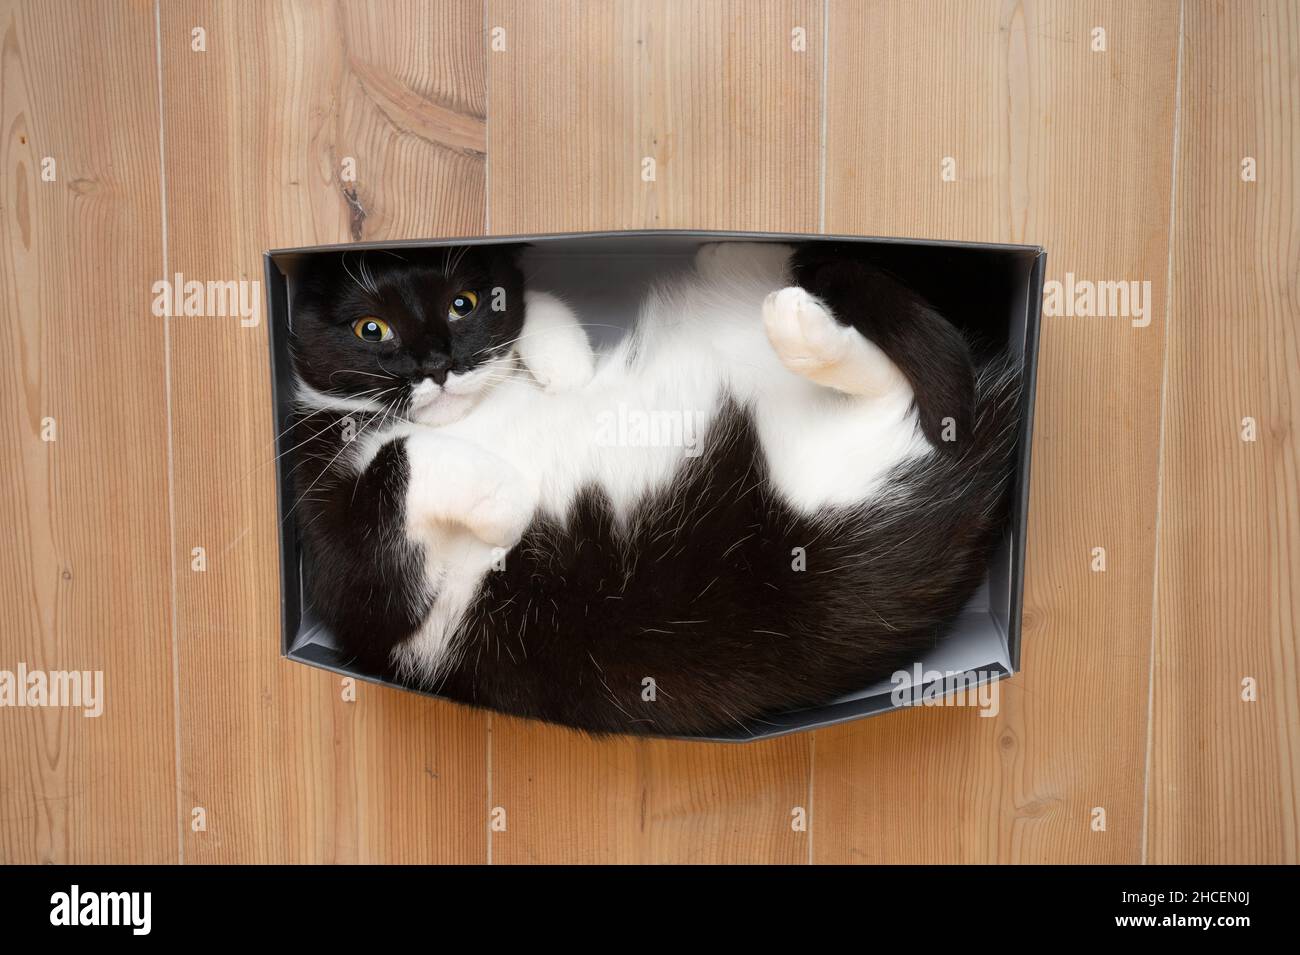 top view of cute black and white cat resting in small shoe cardboard box on the floor looking up at camera Stock Photo